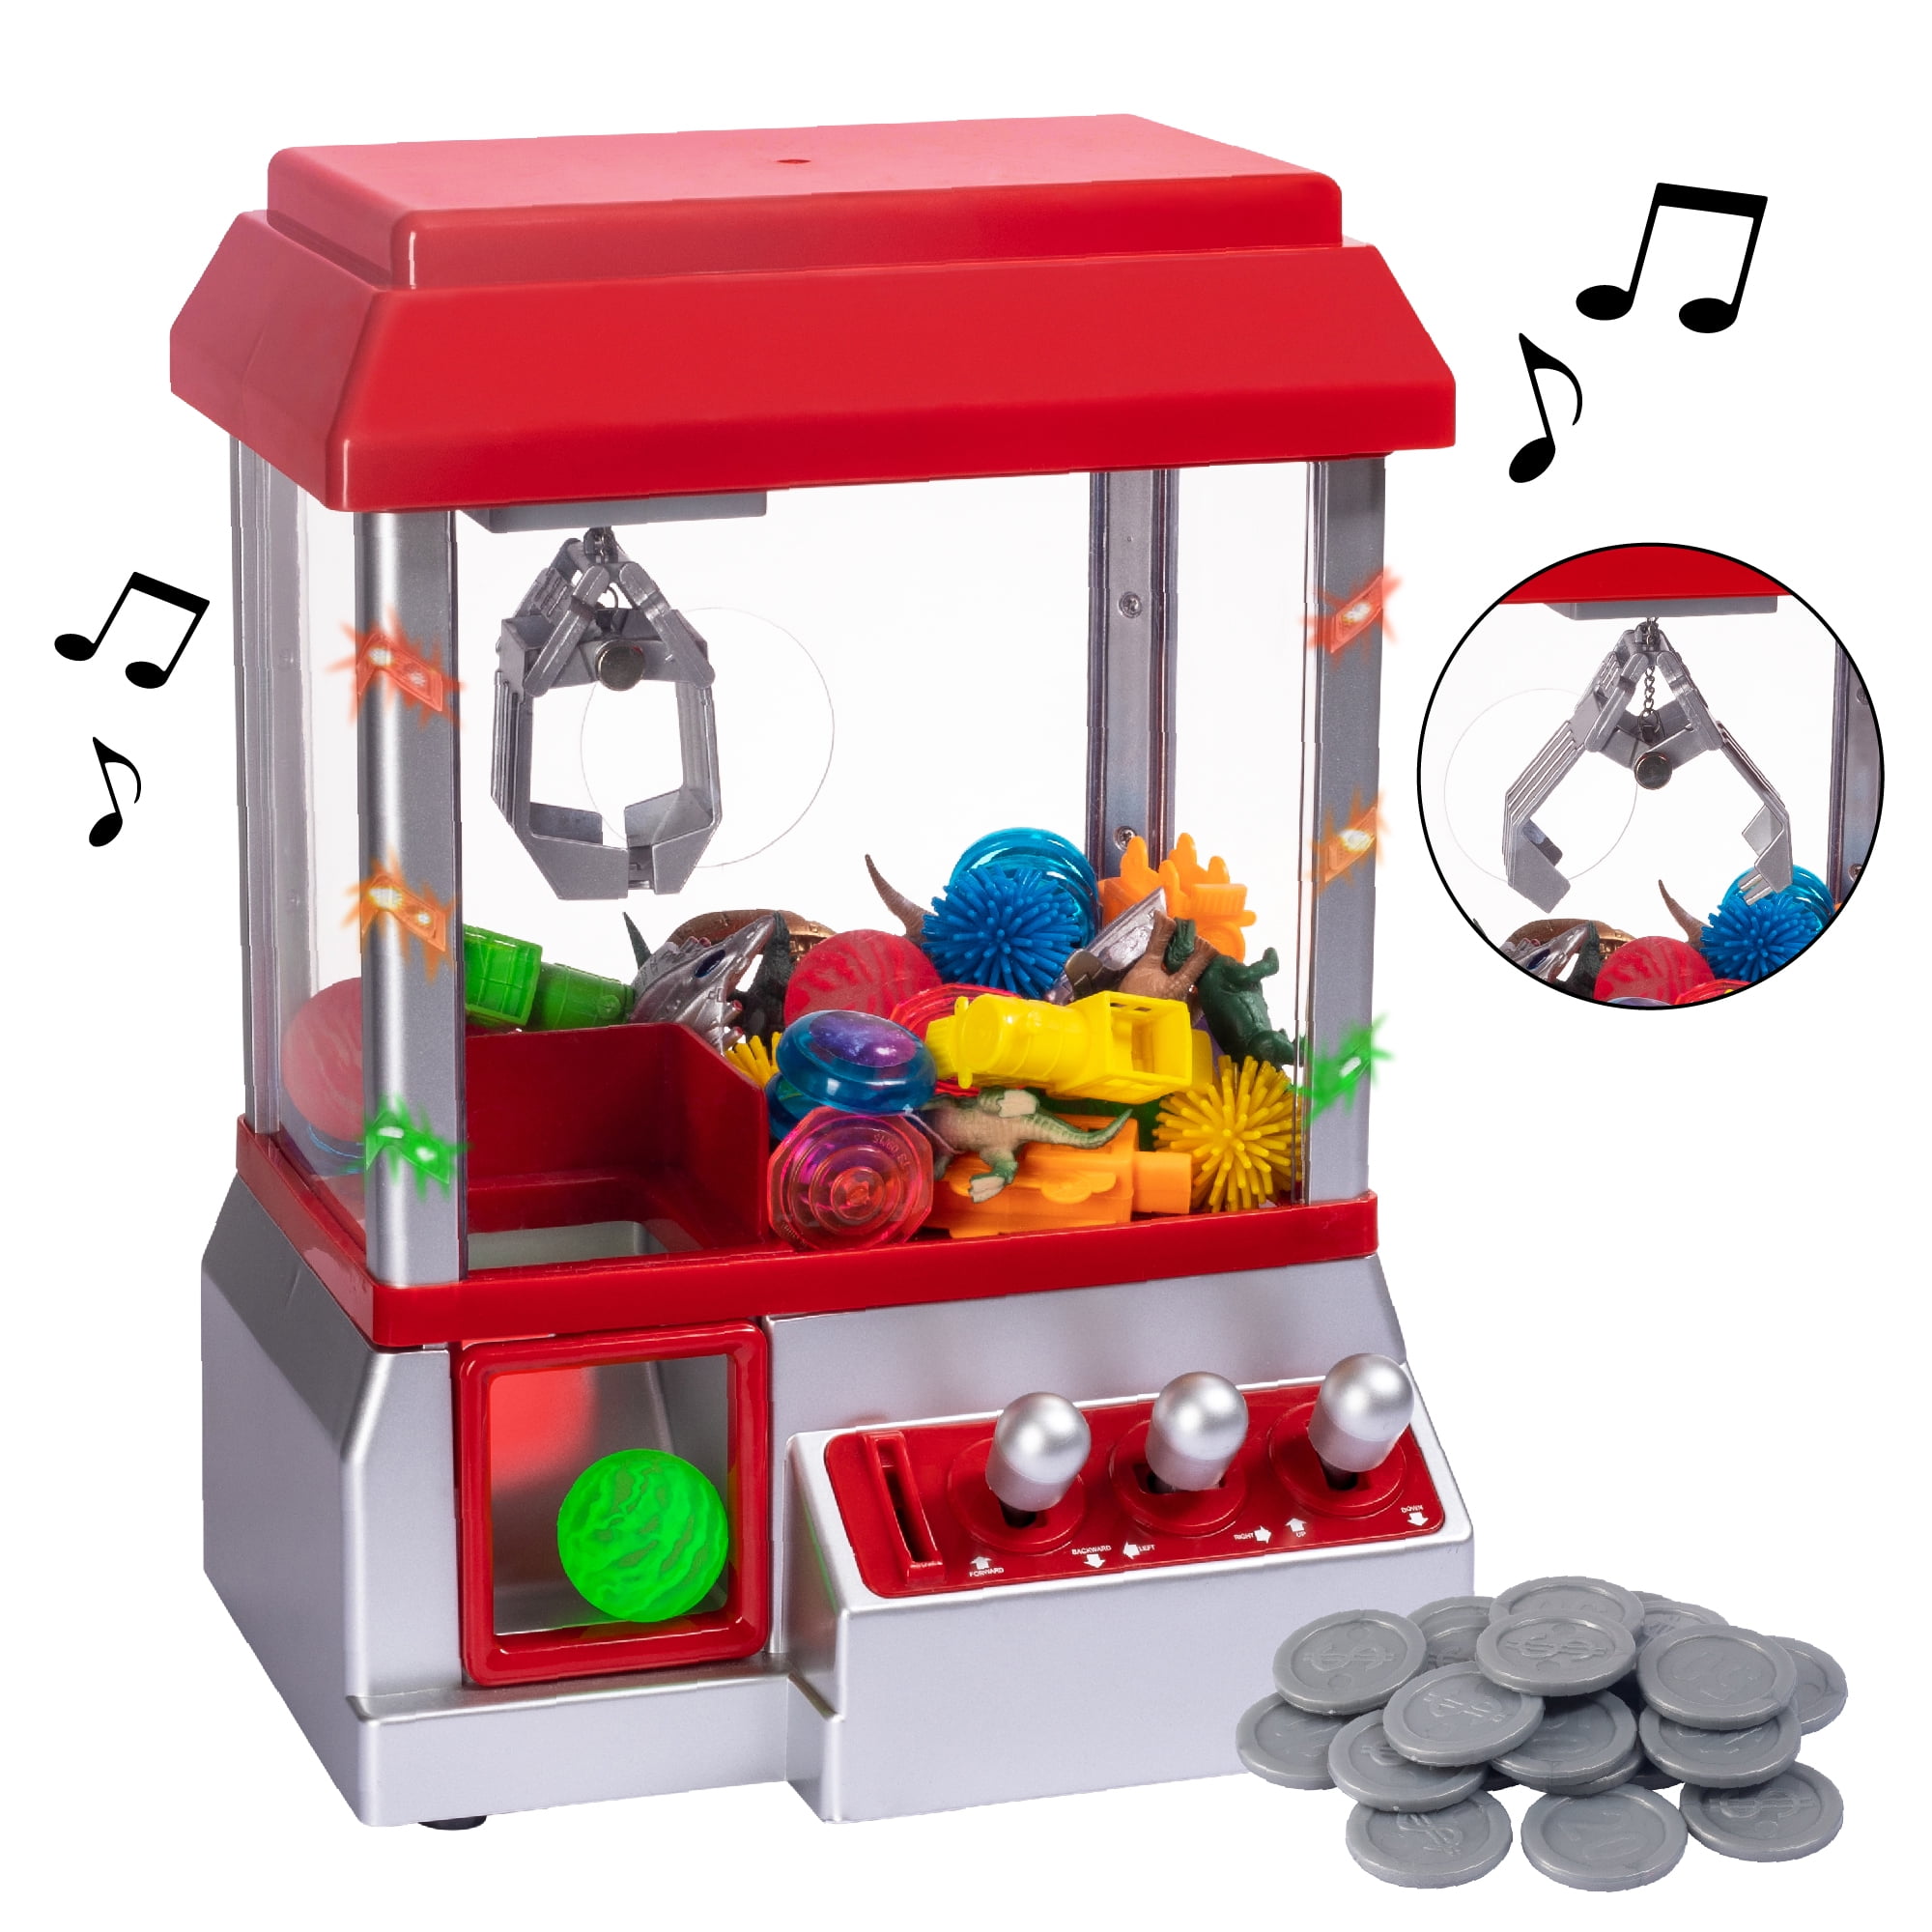 Home Electronic Claw Toy Grabber Classic Arcade Carnival Game w/ Lights & Sound 